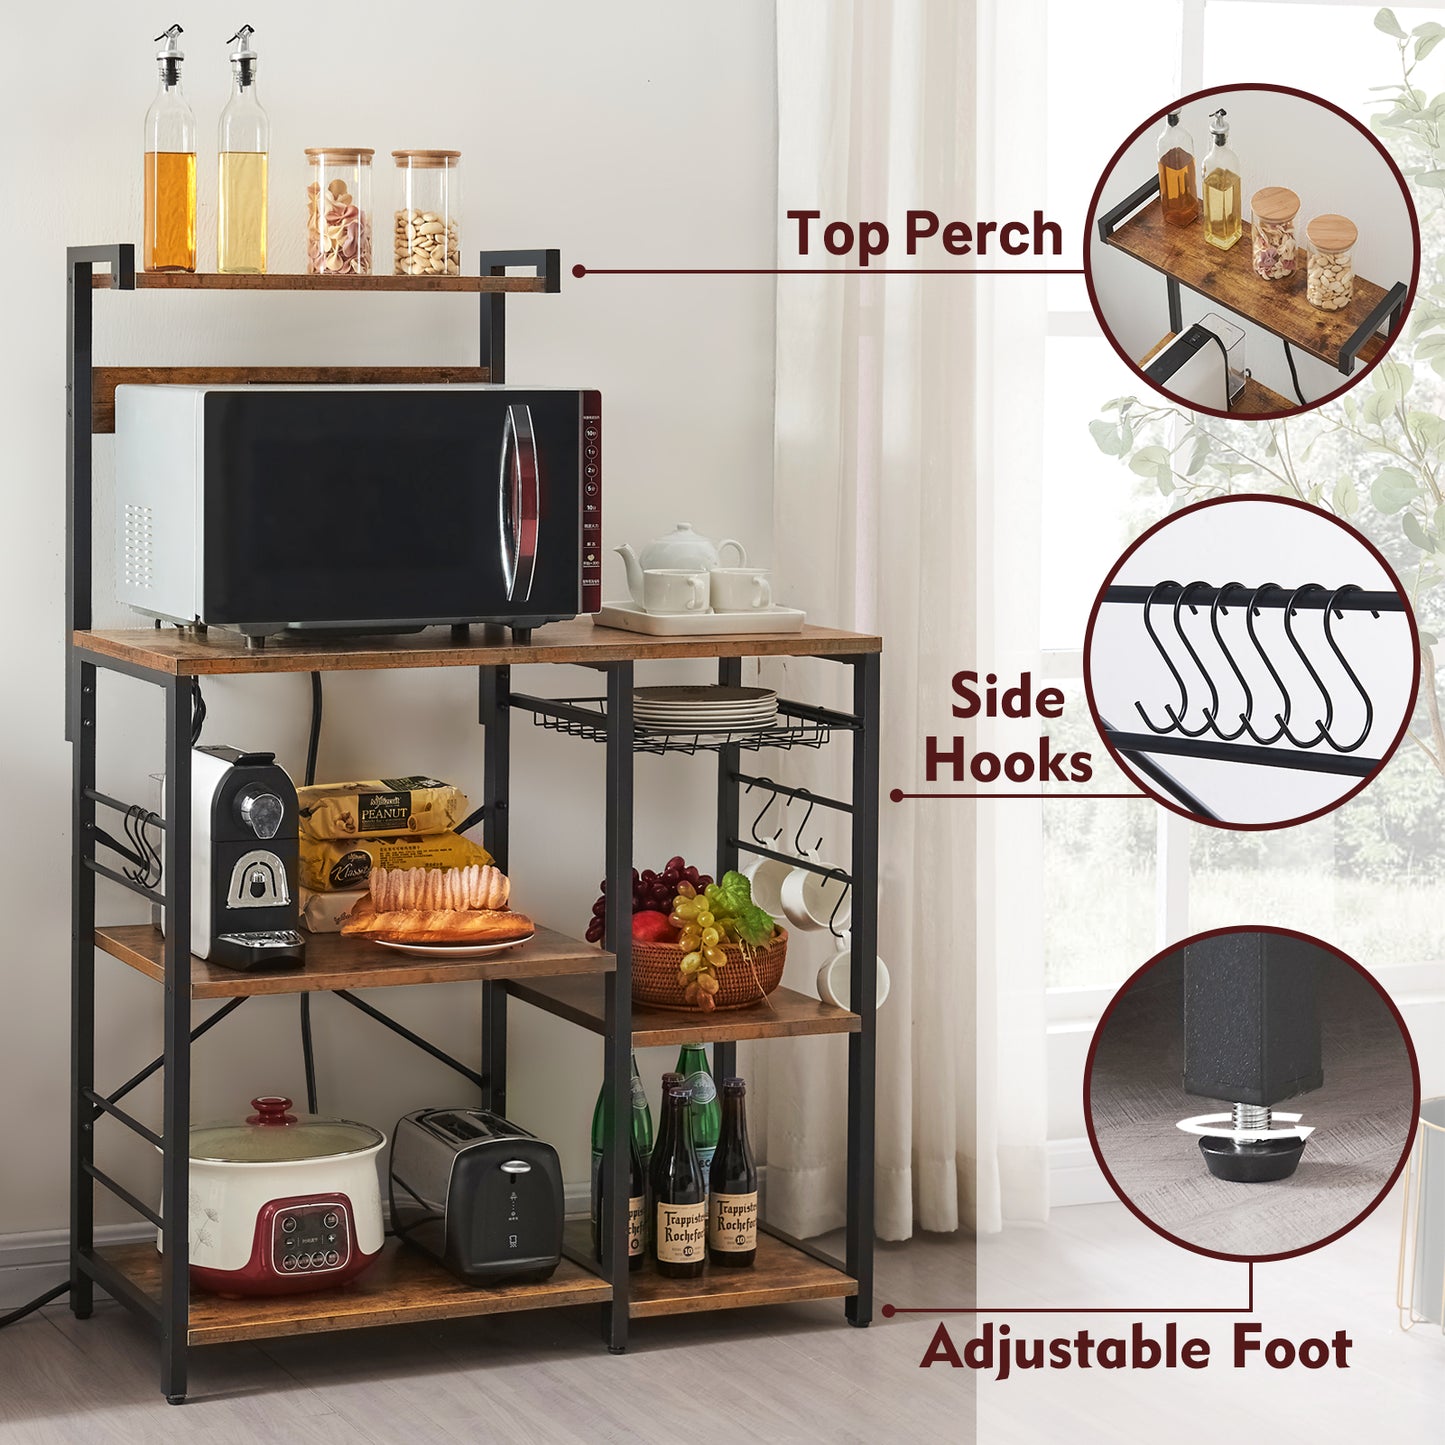 SUPERJARE Kitchen Baker’s Rack with Power Strip, 80919FC